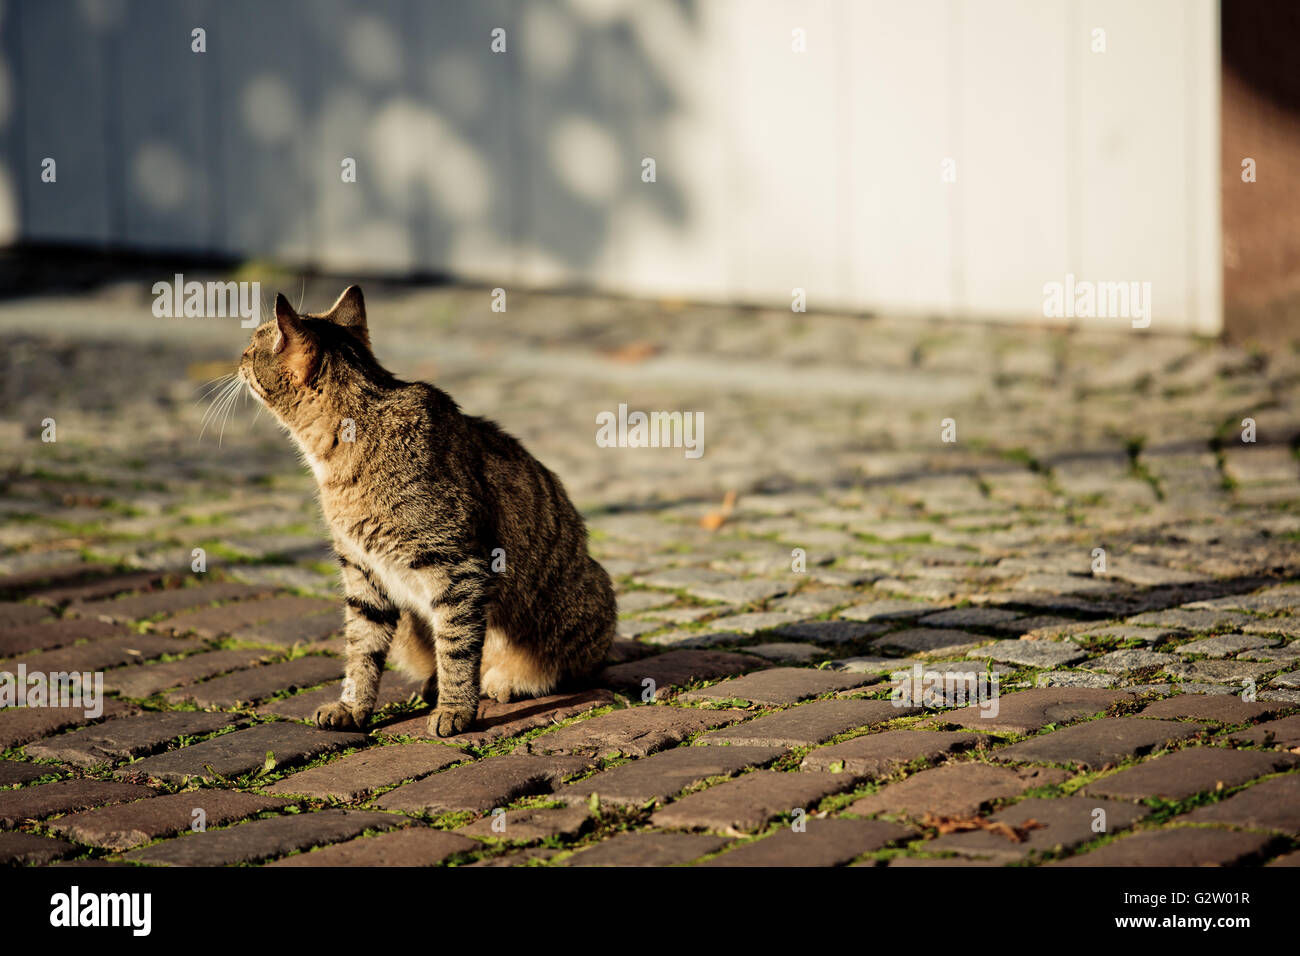 Animal Portrait of a house cat walking the streets Stock Photo